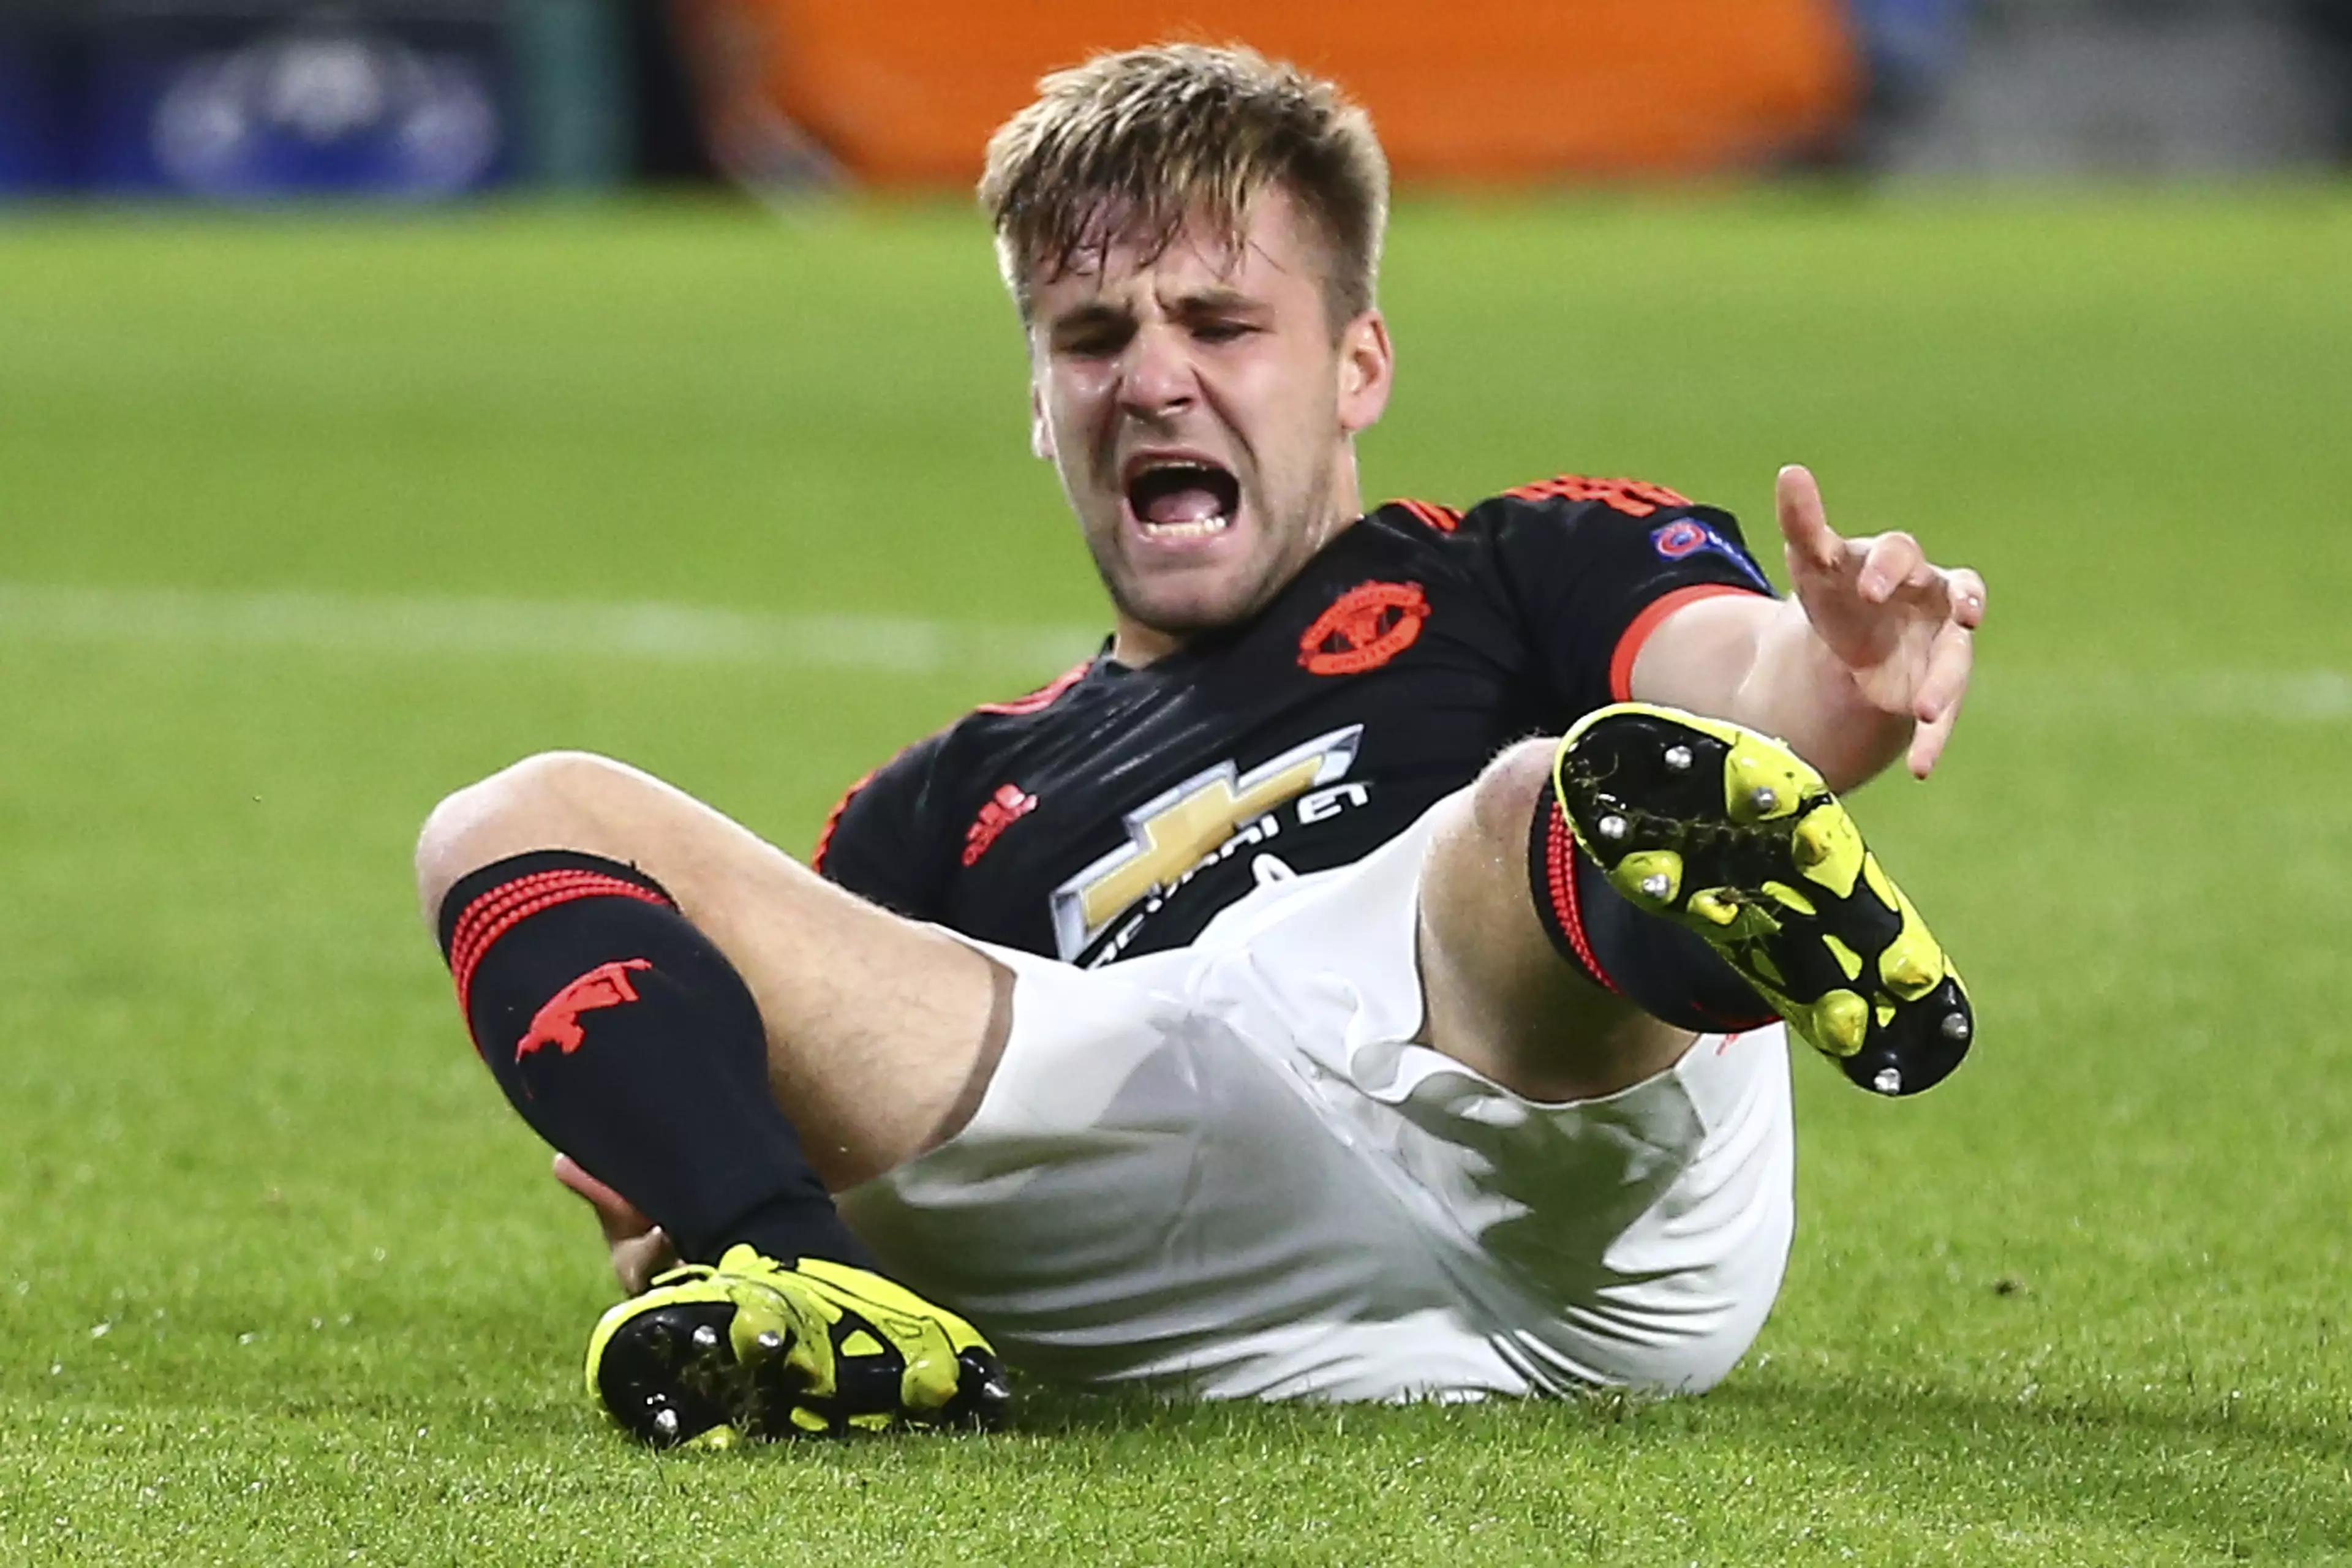 Shaw suffered a broken leg in a Champions League game. Image: PA Images